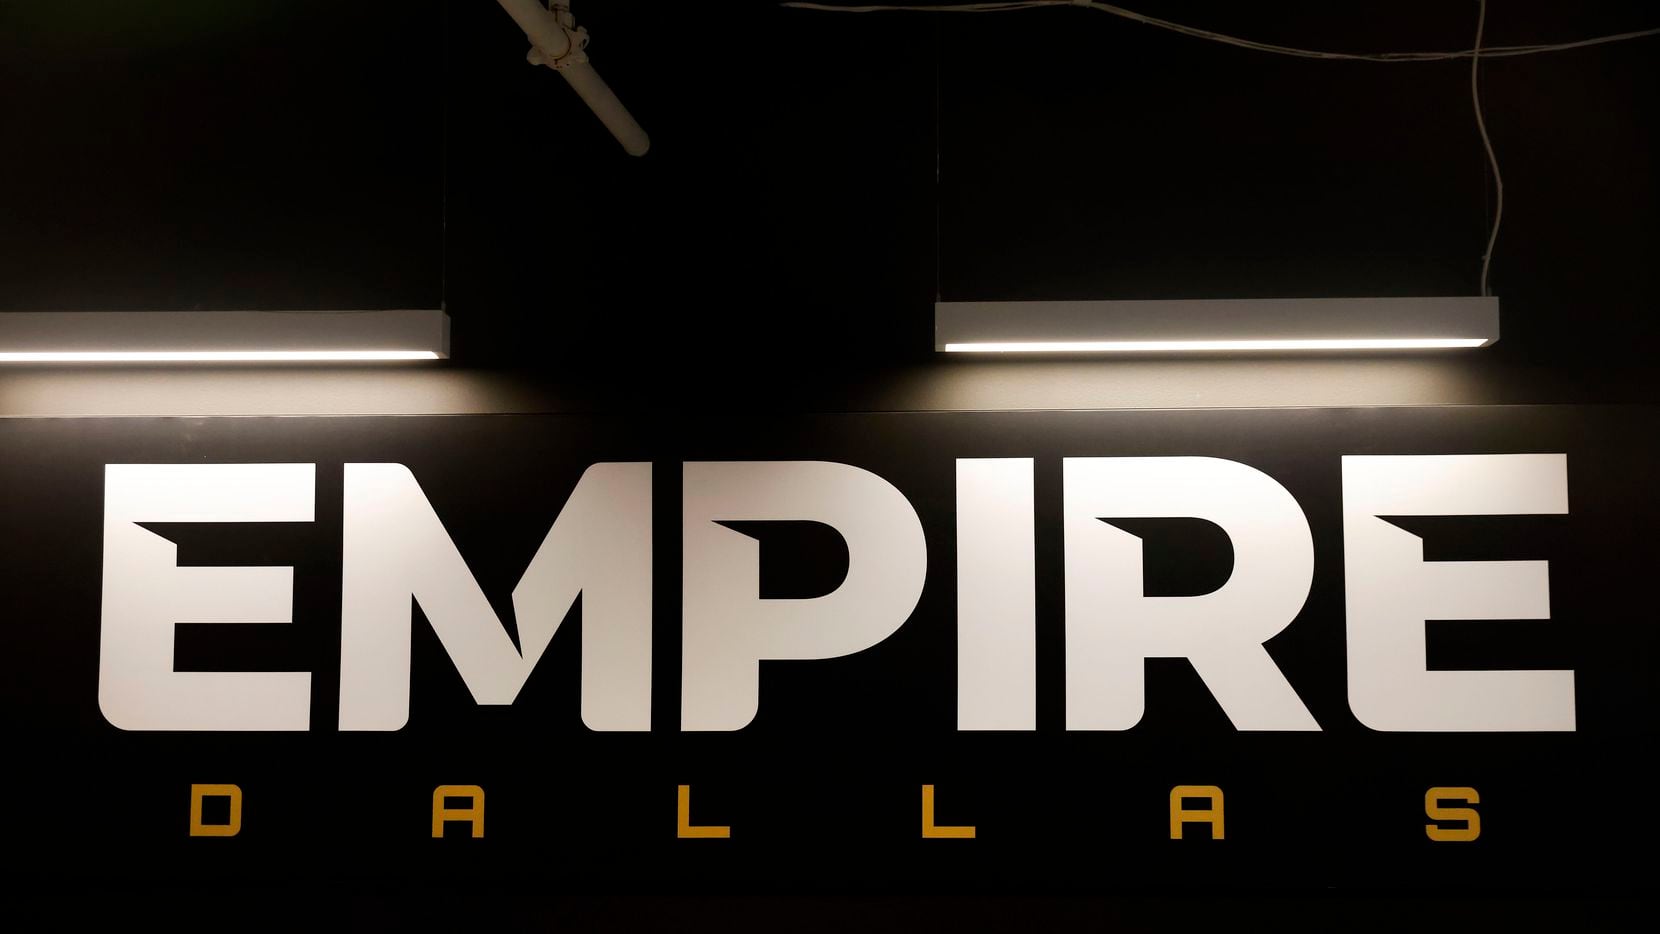 The Dallas Empire team in the Call of Duty League won the championship last year. They are located at Envy Gaming Headquarters in Dallas, Monday, March 29, 2021. (Tom Fox/The Dallas Morning News)